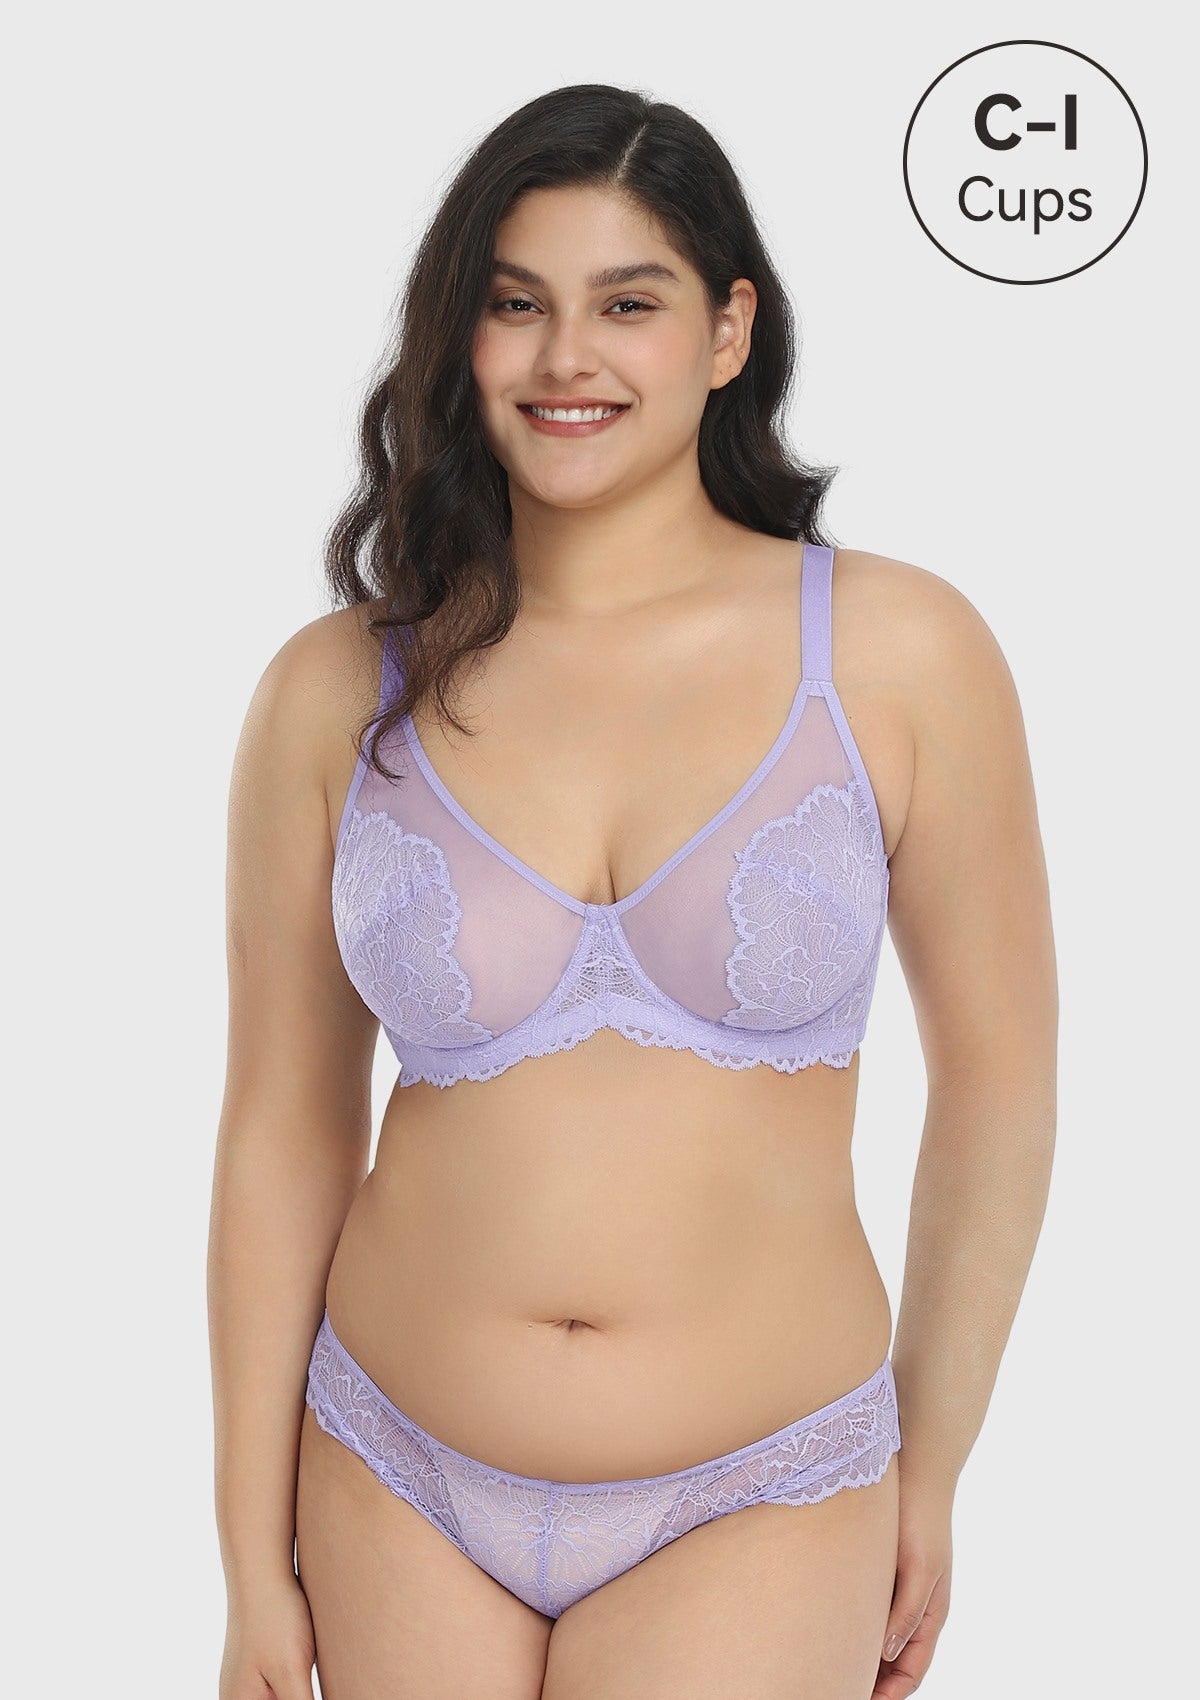 HSIA Blossom Transparent Lace Bra: Plus Size Wired Back Smoothing Bra - Light Purple / 34 / D